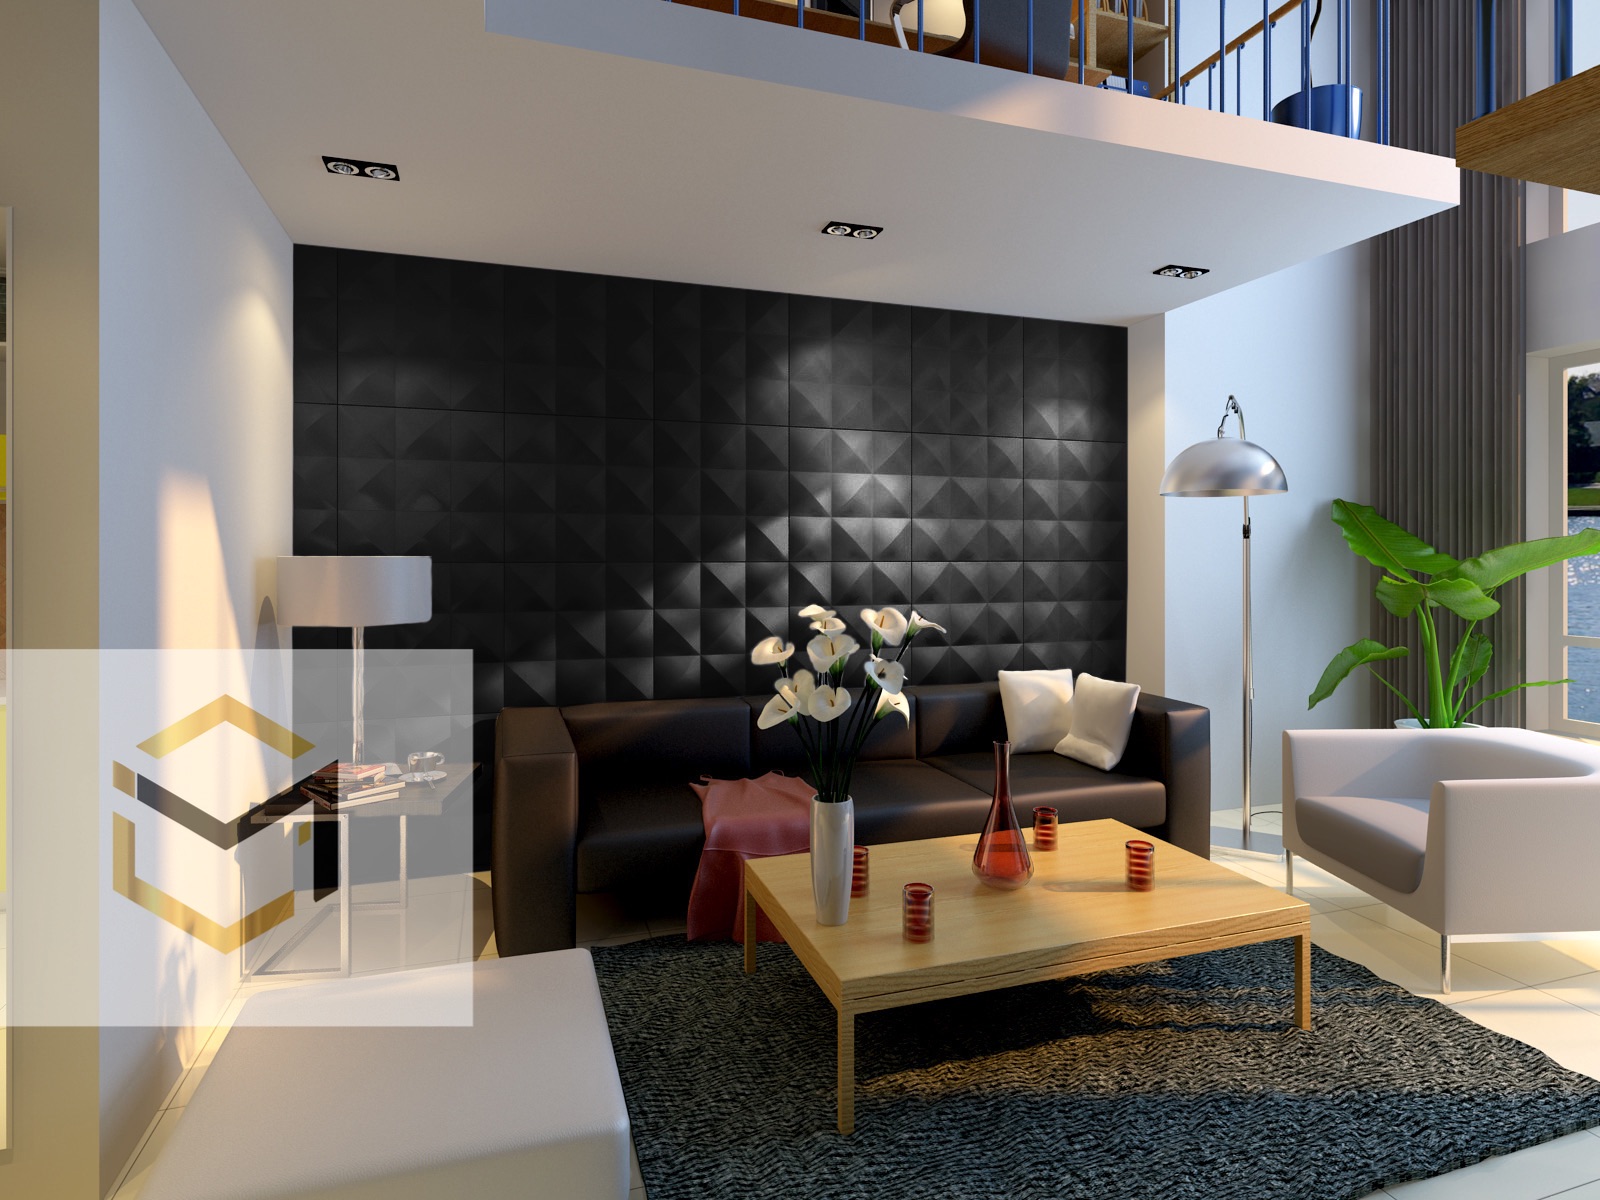 Sound absorption acoustic panels in living room